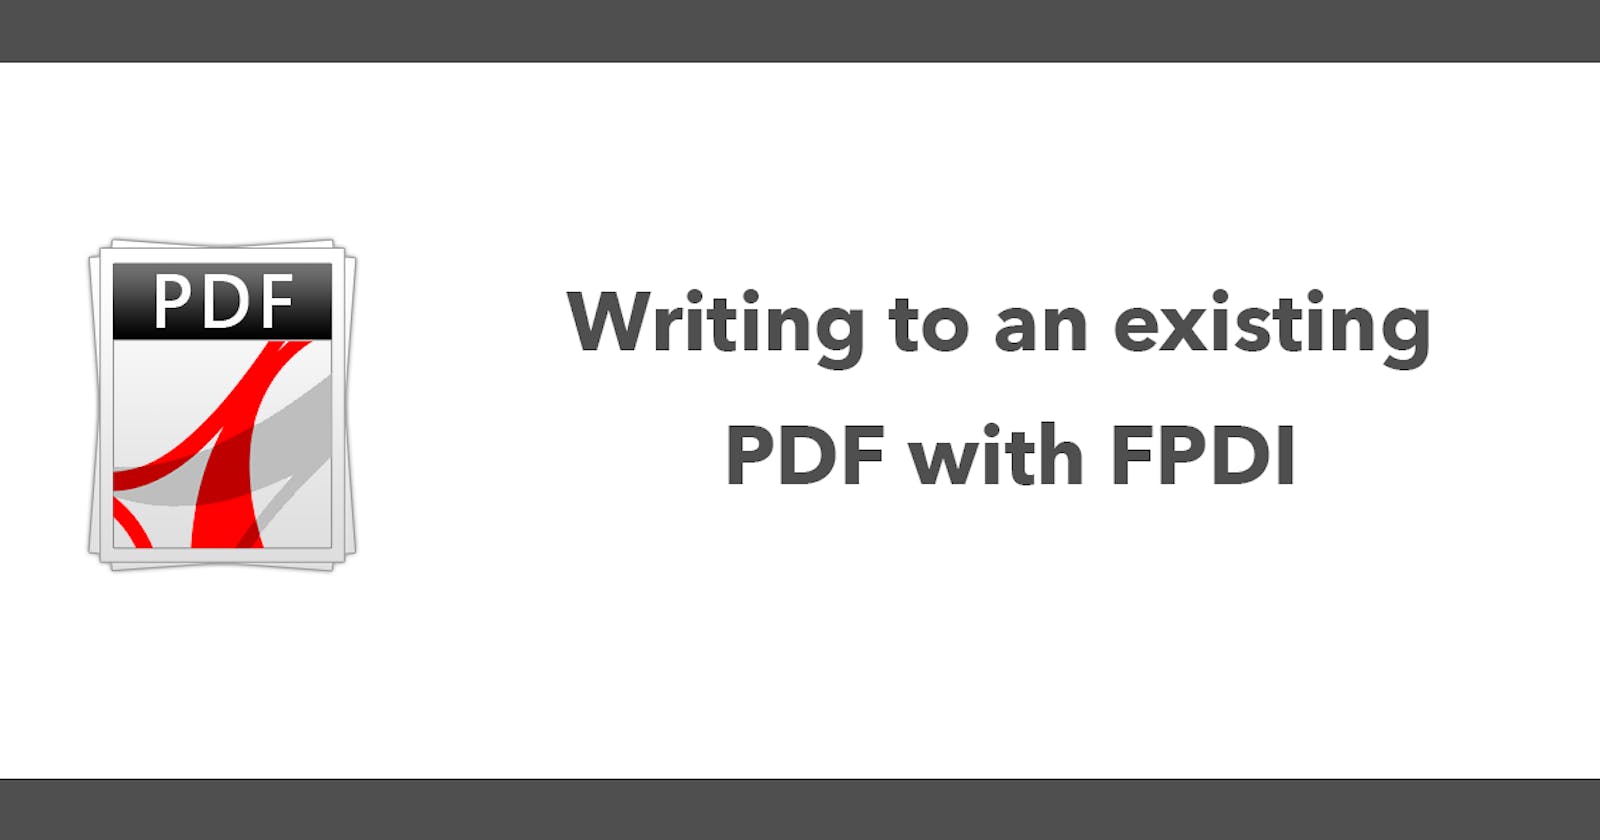 Writing to an existing PDF with FPDI